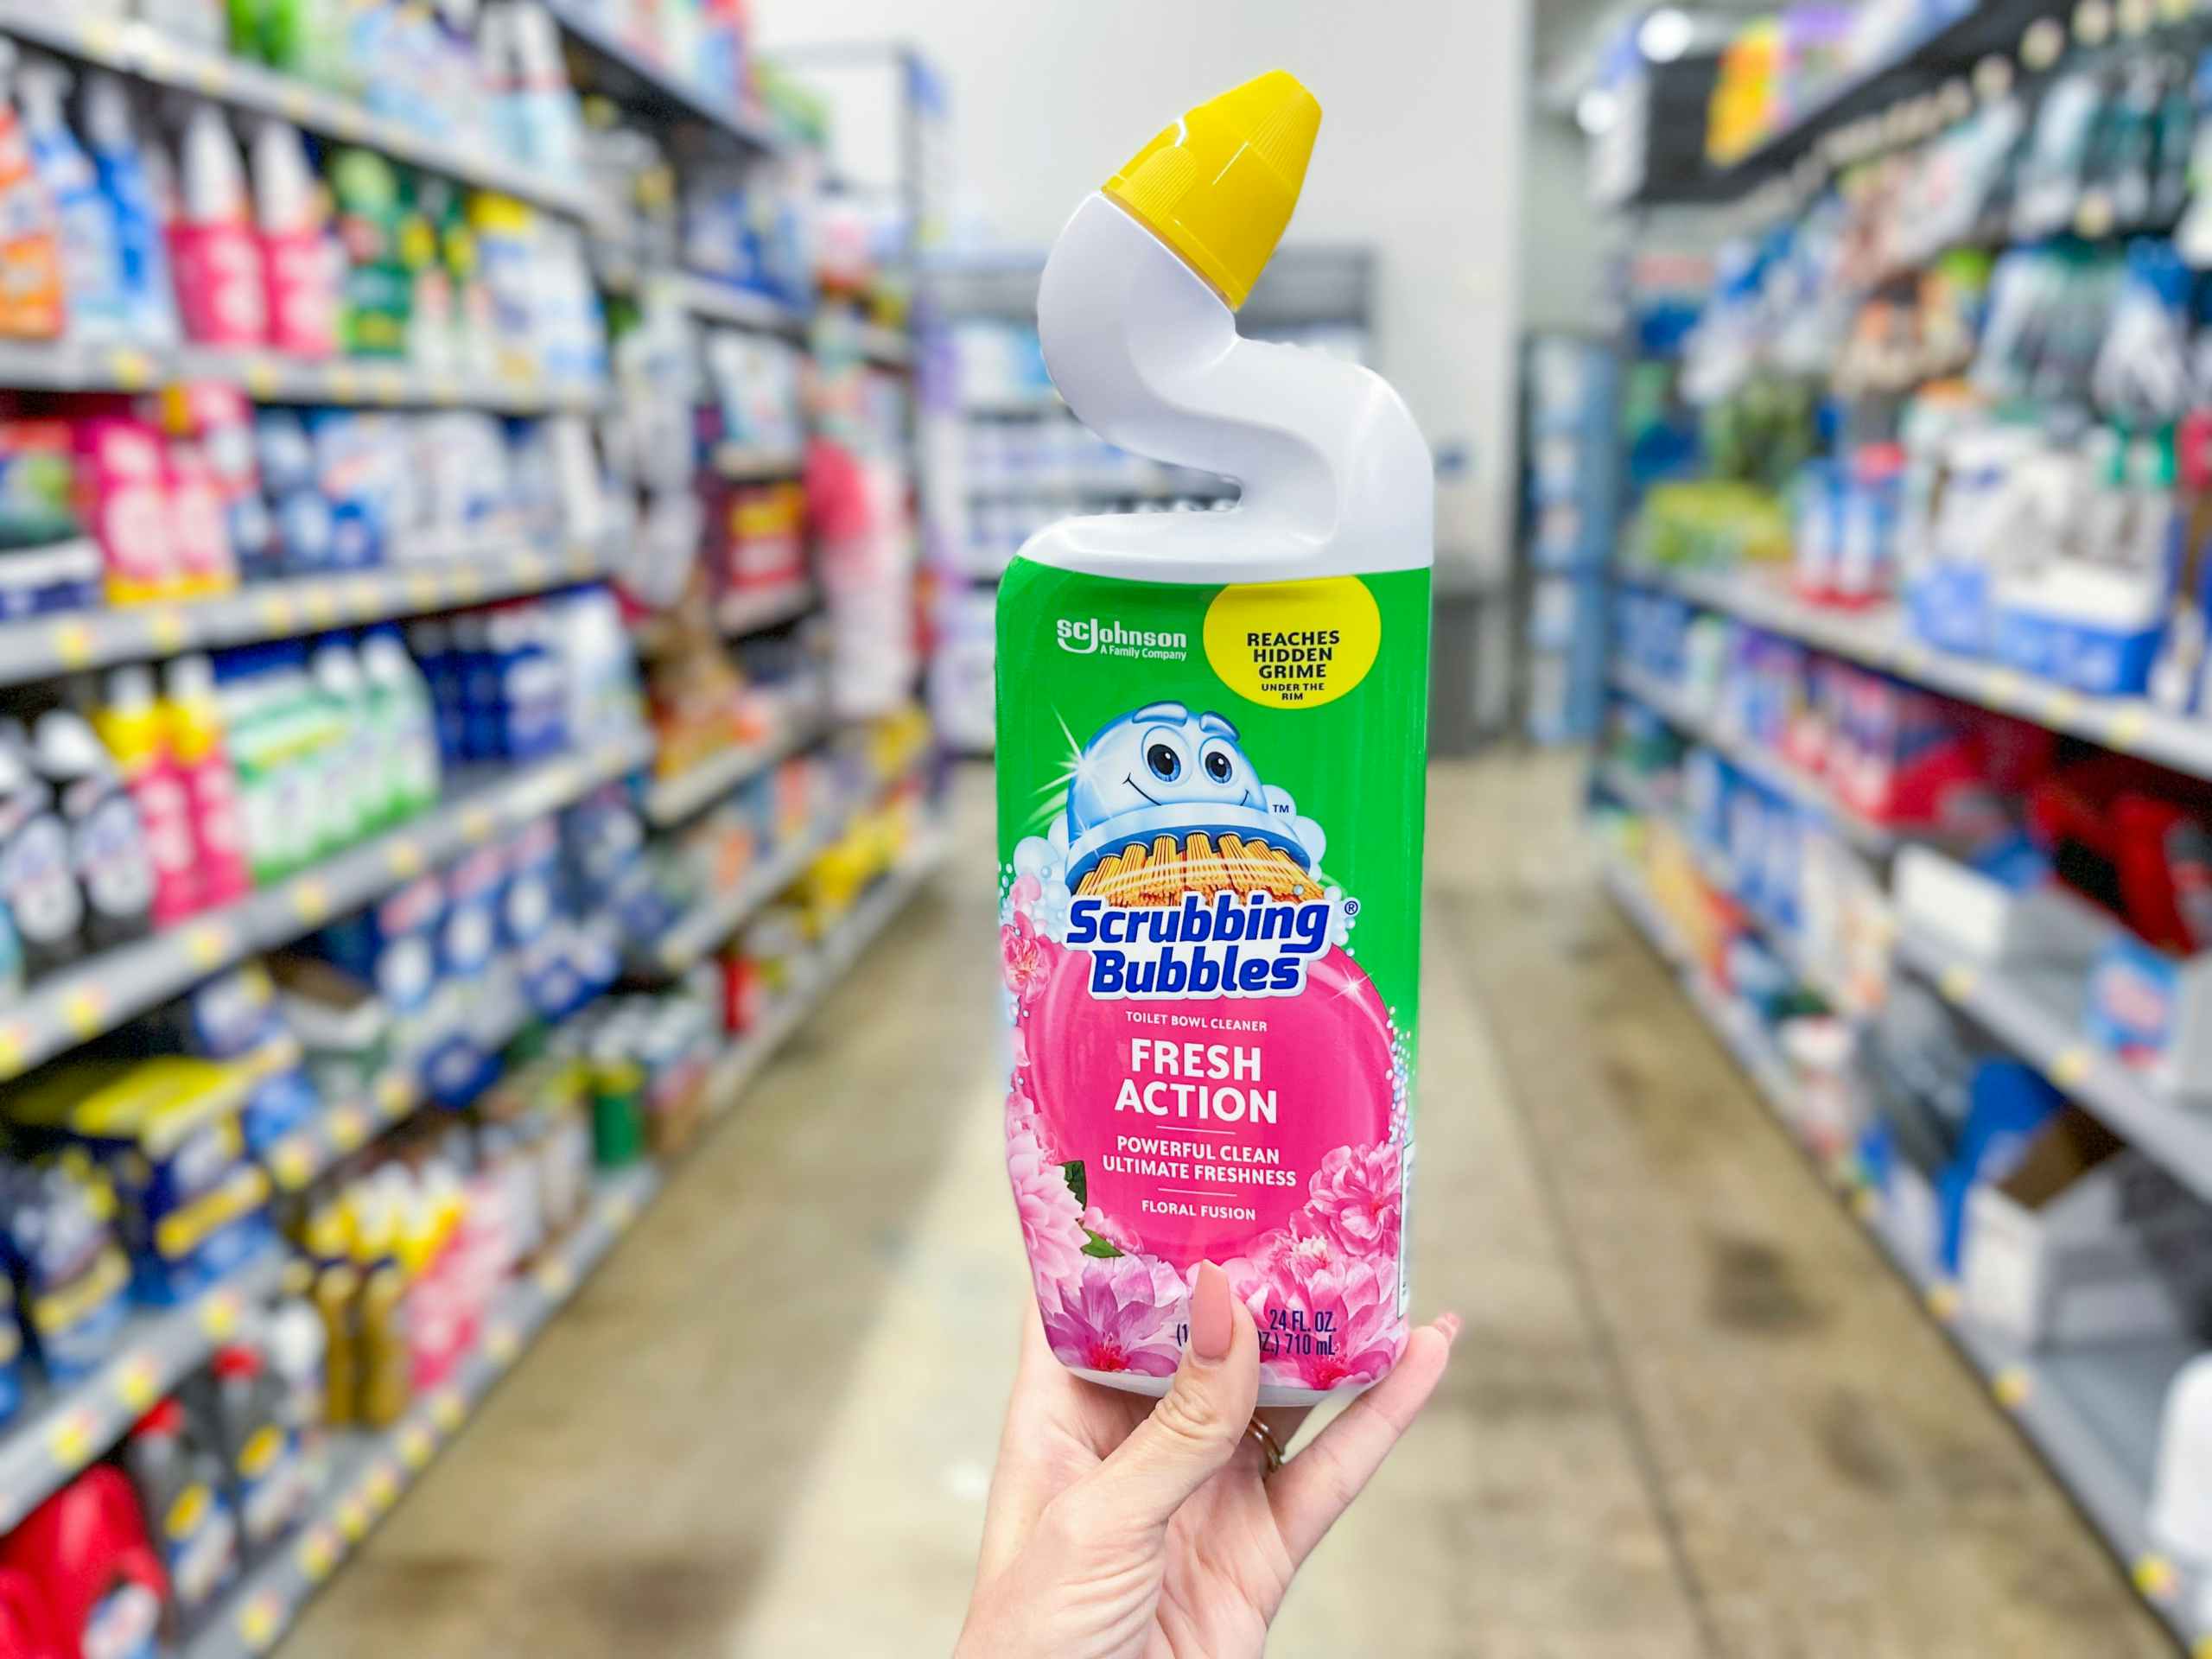 A bottle of scrubbing bubbles fresh action held out by hand in front of a cleaning aisle in a store.